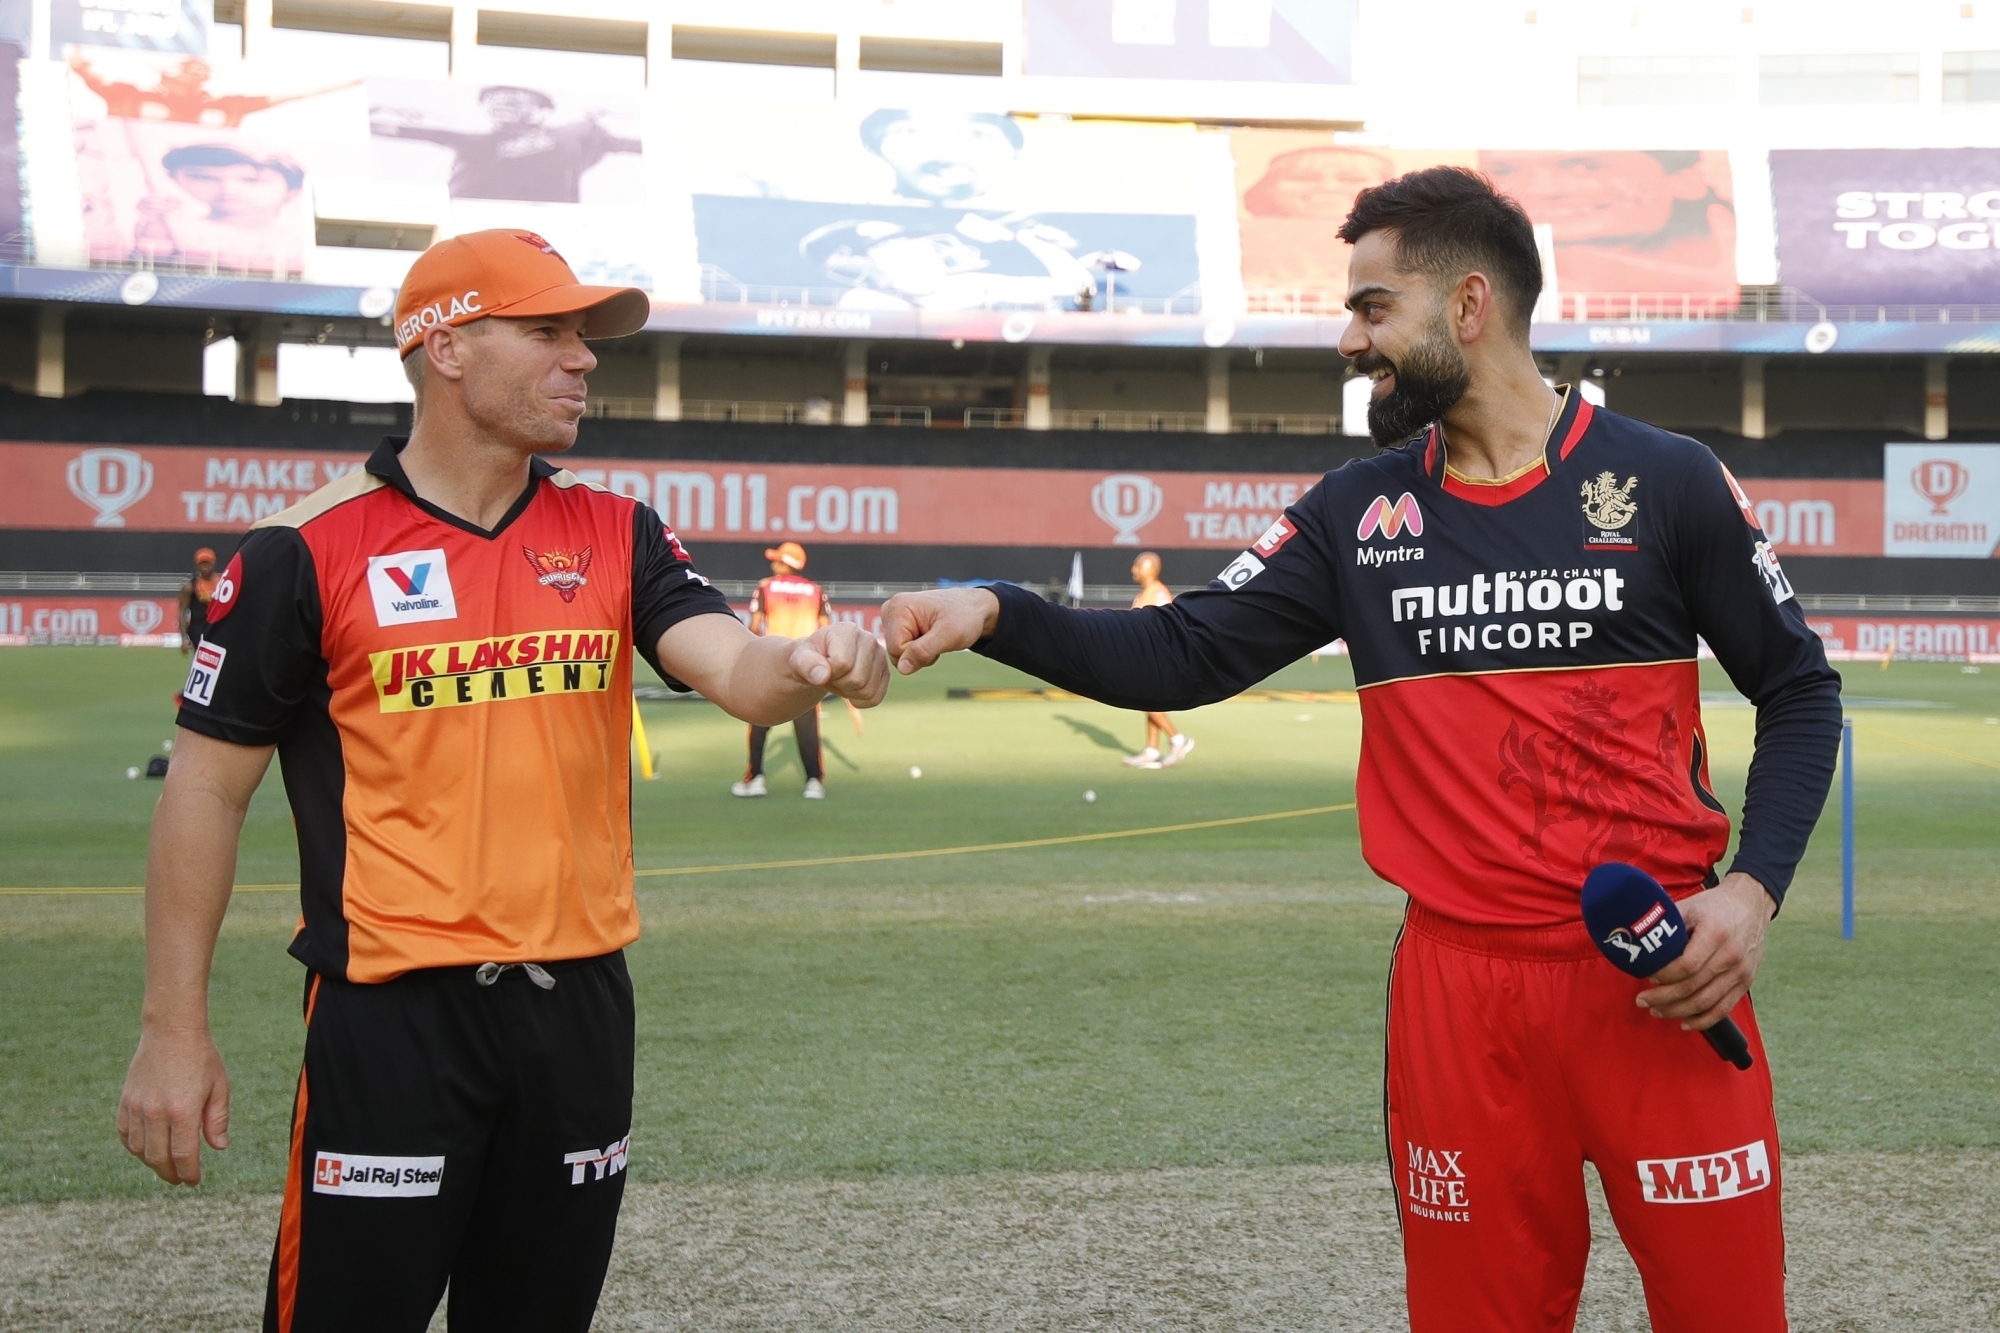 RCB had defeated SRH in their previous meeting in IPL 2020 | BCCI/IPL